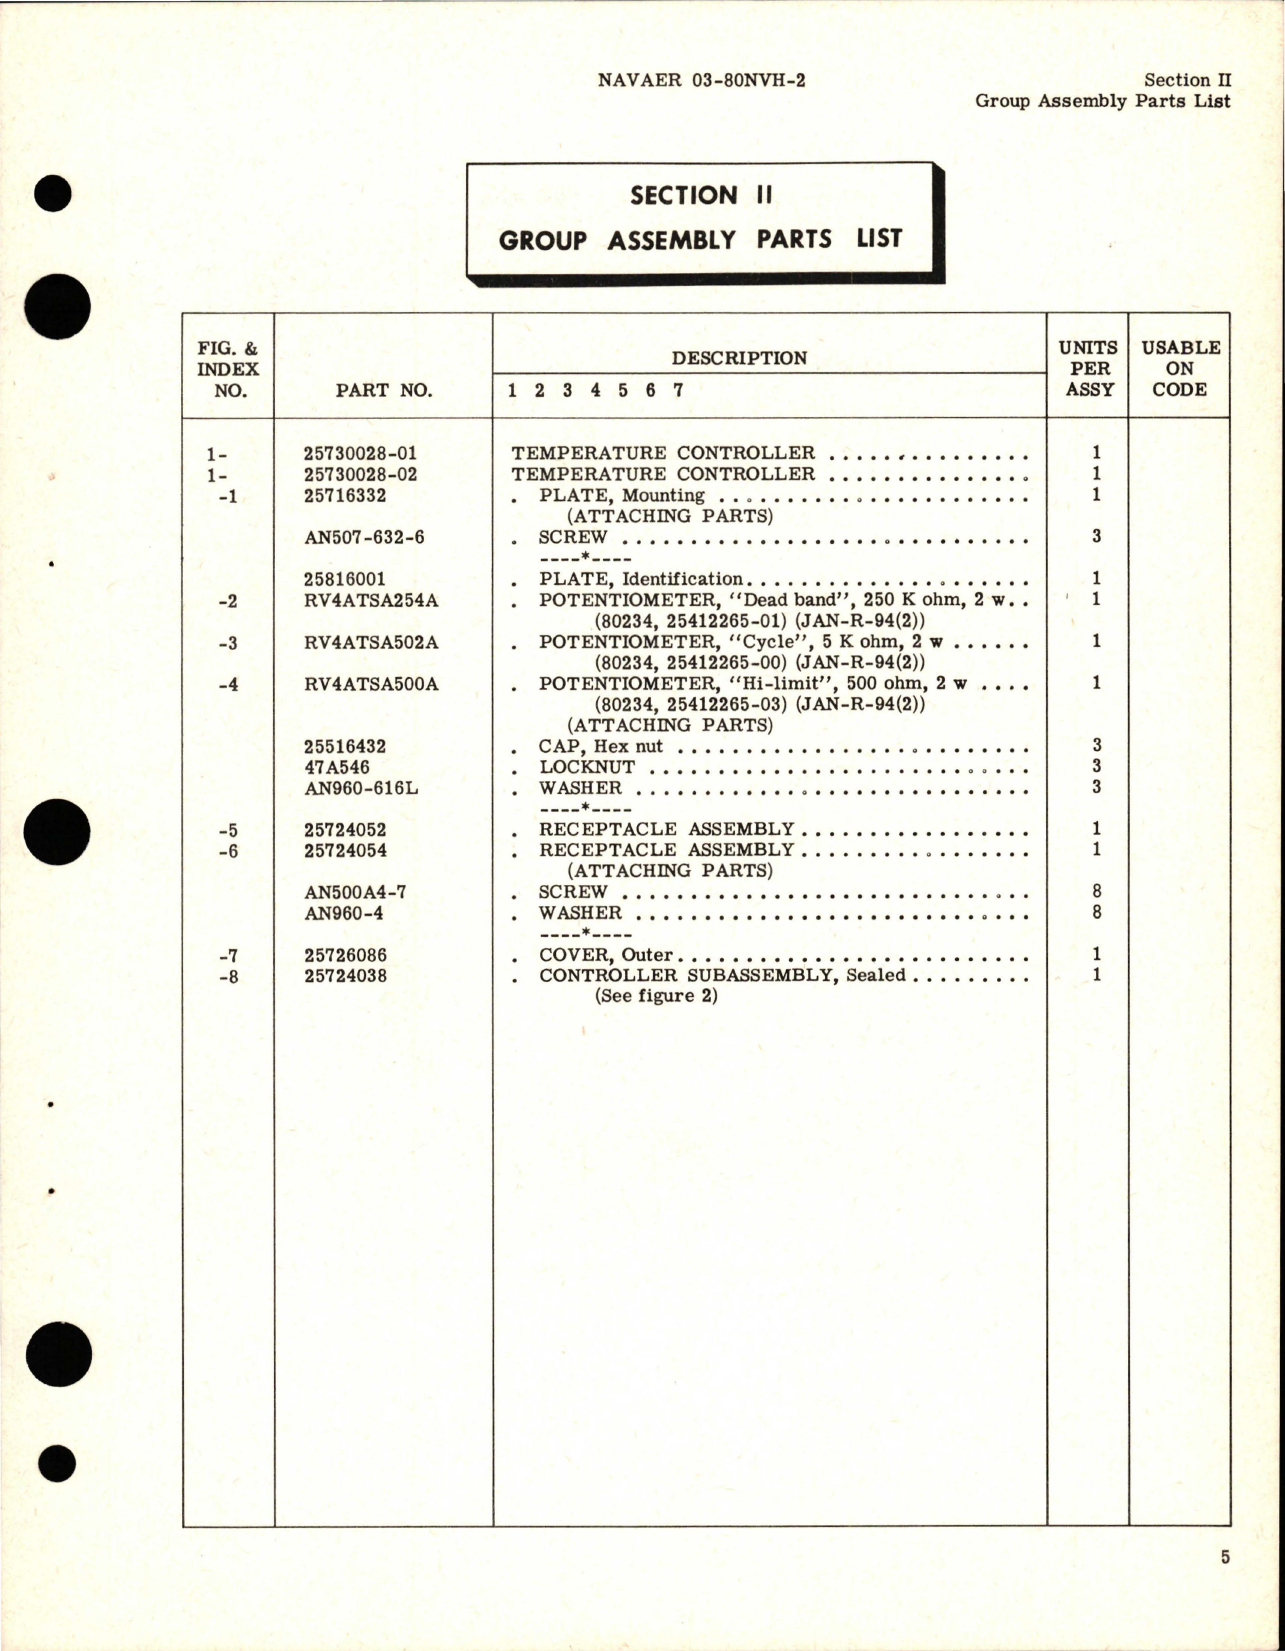 Sample page 7 from AirCorps Library document: Illustrated Parts Breakdown for Temperature Controller - Parts 25730028-01 and 25730028-02 